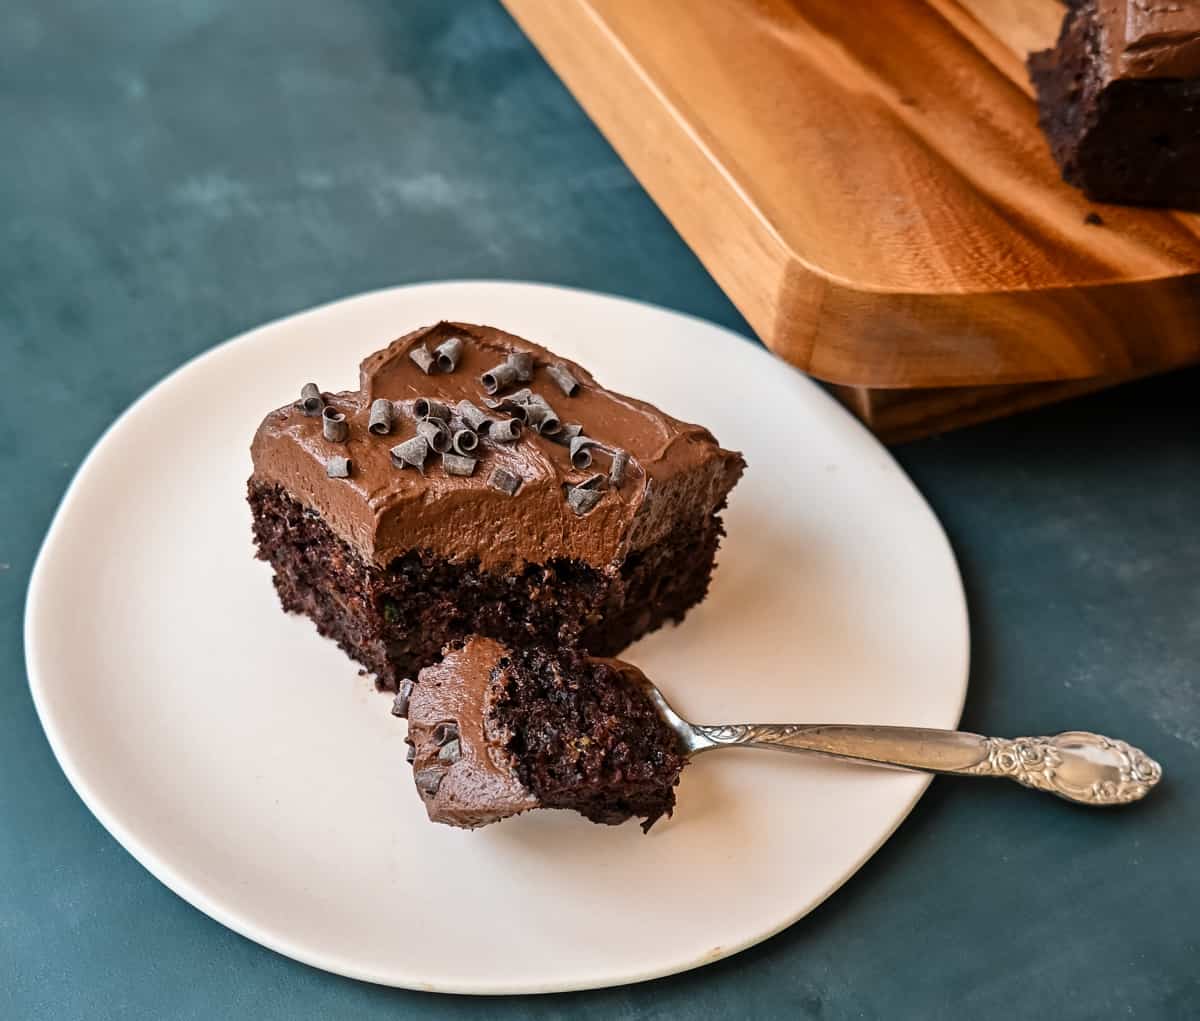 How to make the best chocolate zucchini cake with chocolate frosting. This frosted chocolate zucchini cake is the most moist, rich chocolate cake with the most decadent chocolate frosting. You will not even realize you are eating zucchini! Slice of chocolate zucchini  cake.